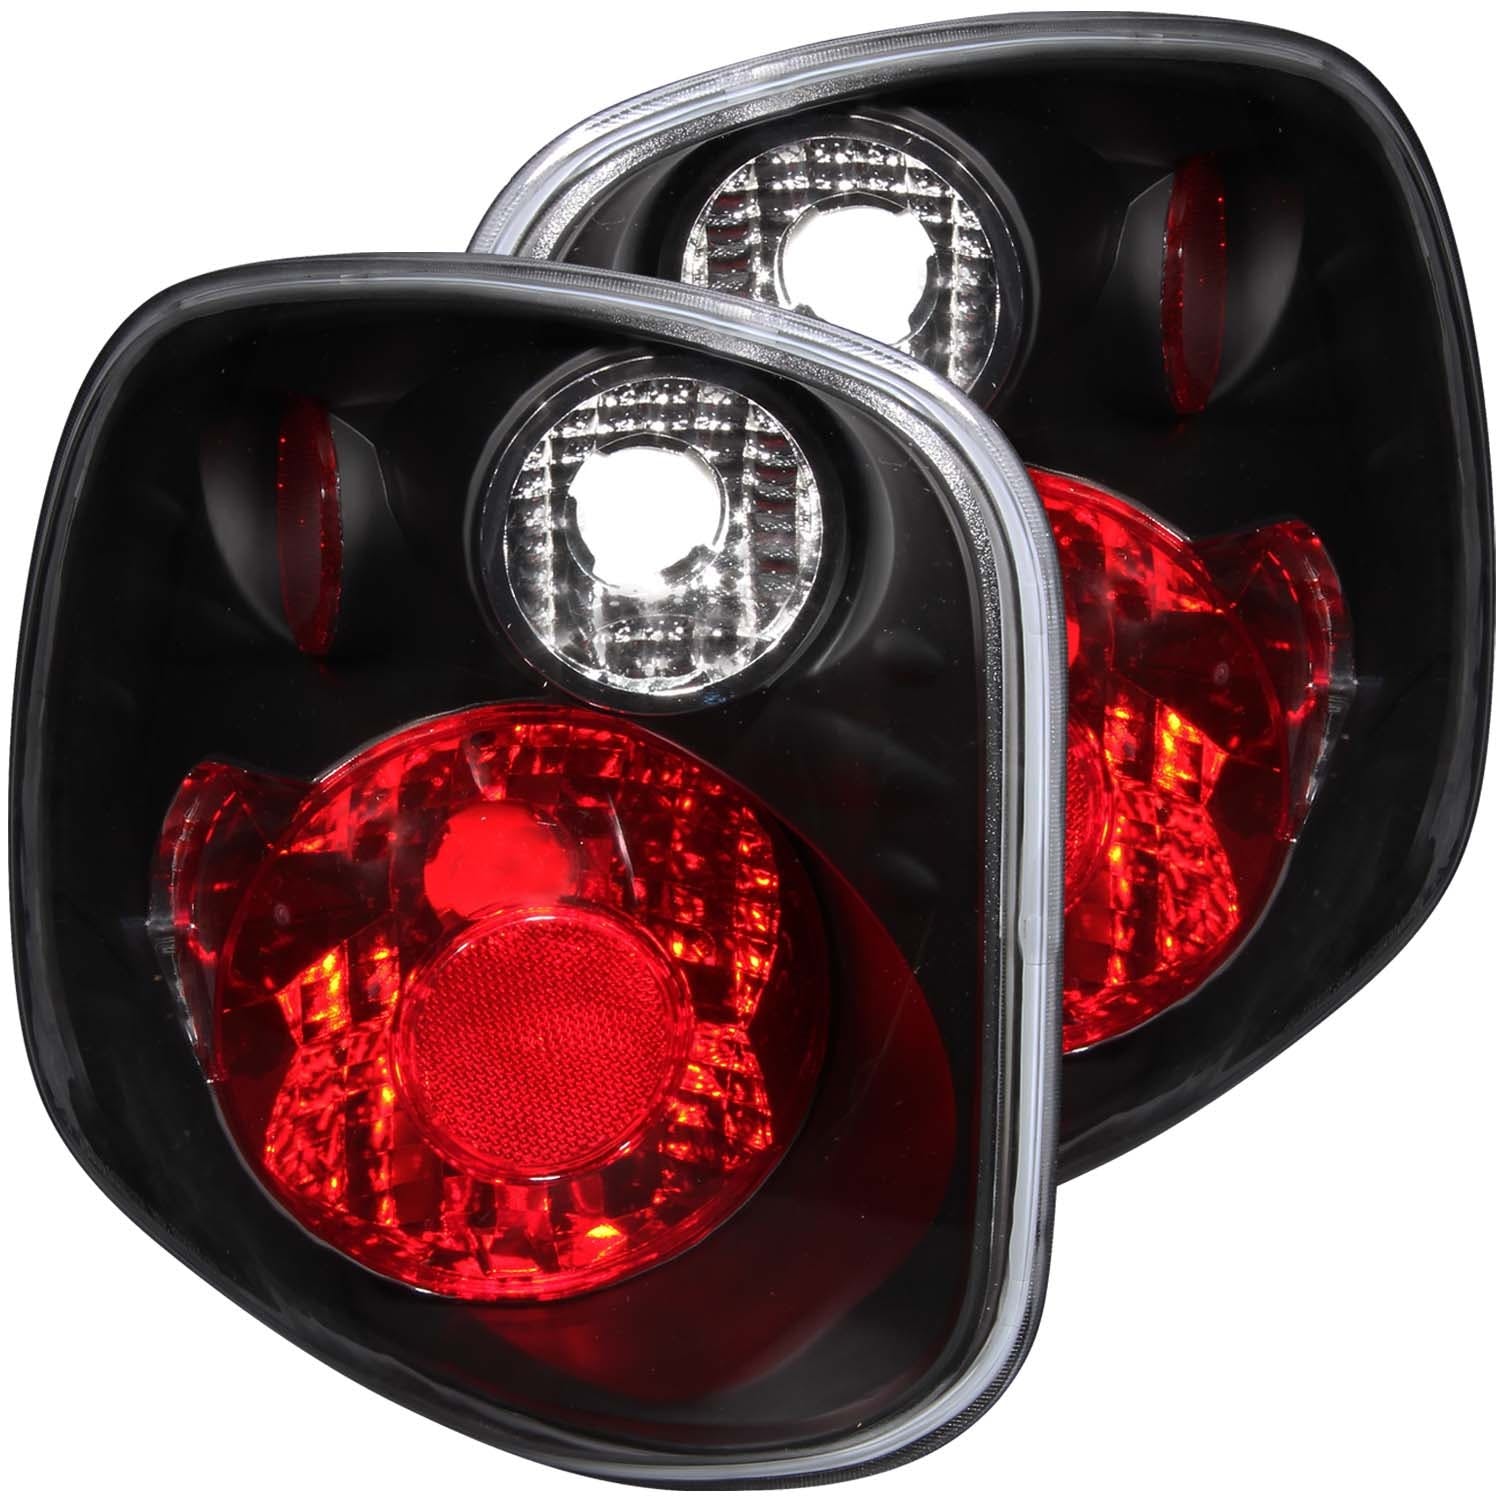 AnzoUSA 211069 Taillights Black